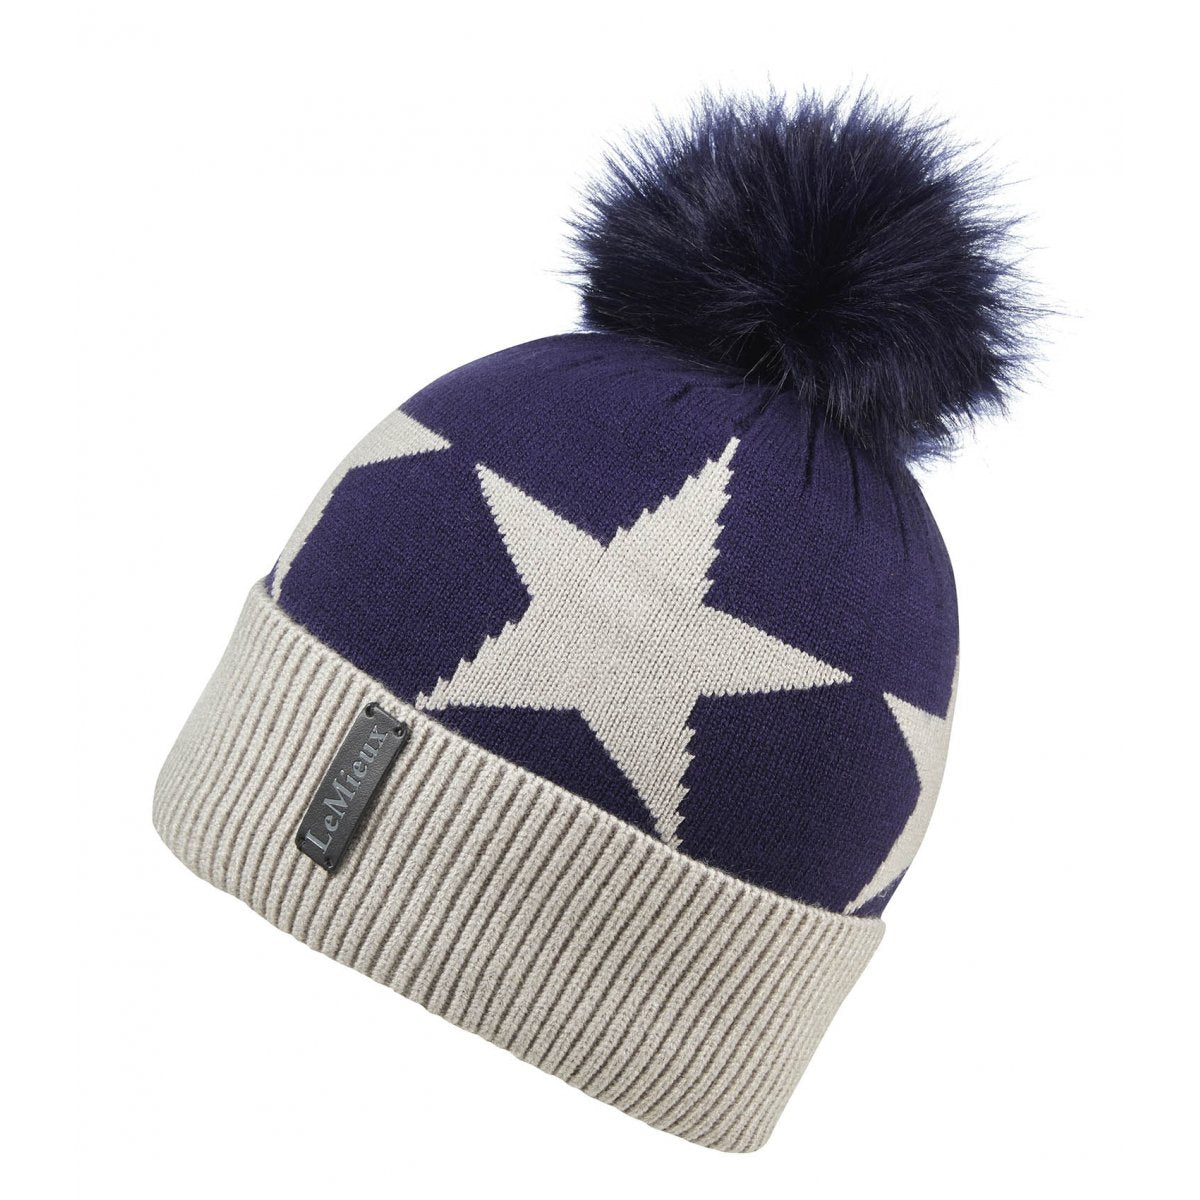 Navy and cream Lemieux beanie with a large star pattern and fluffy pom-pom, branded tag on the ribbed cuff.